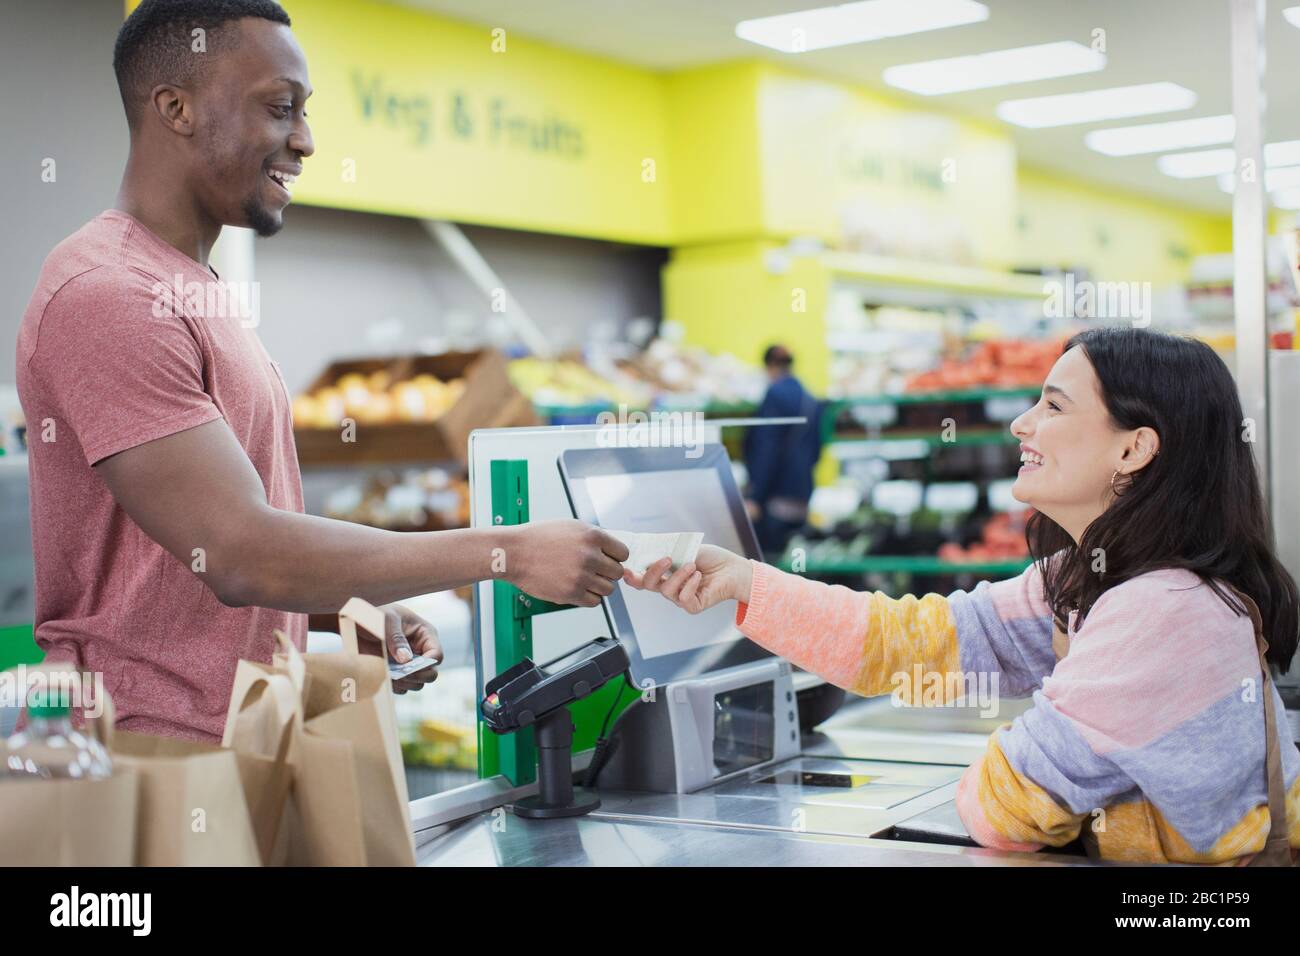 Cashier giving receipt to customer at supermarket checkout Stock Photo